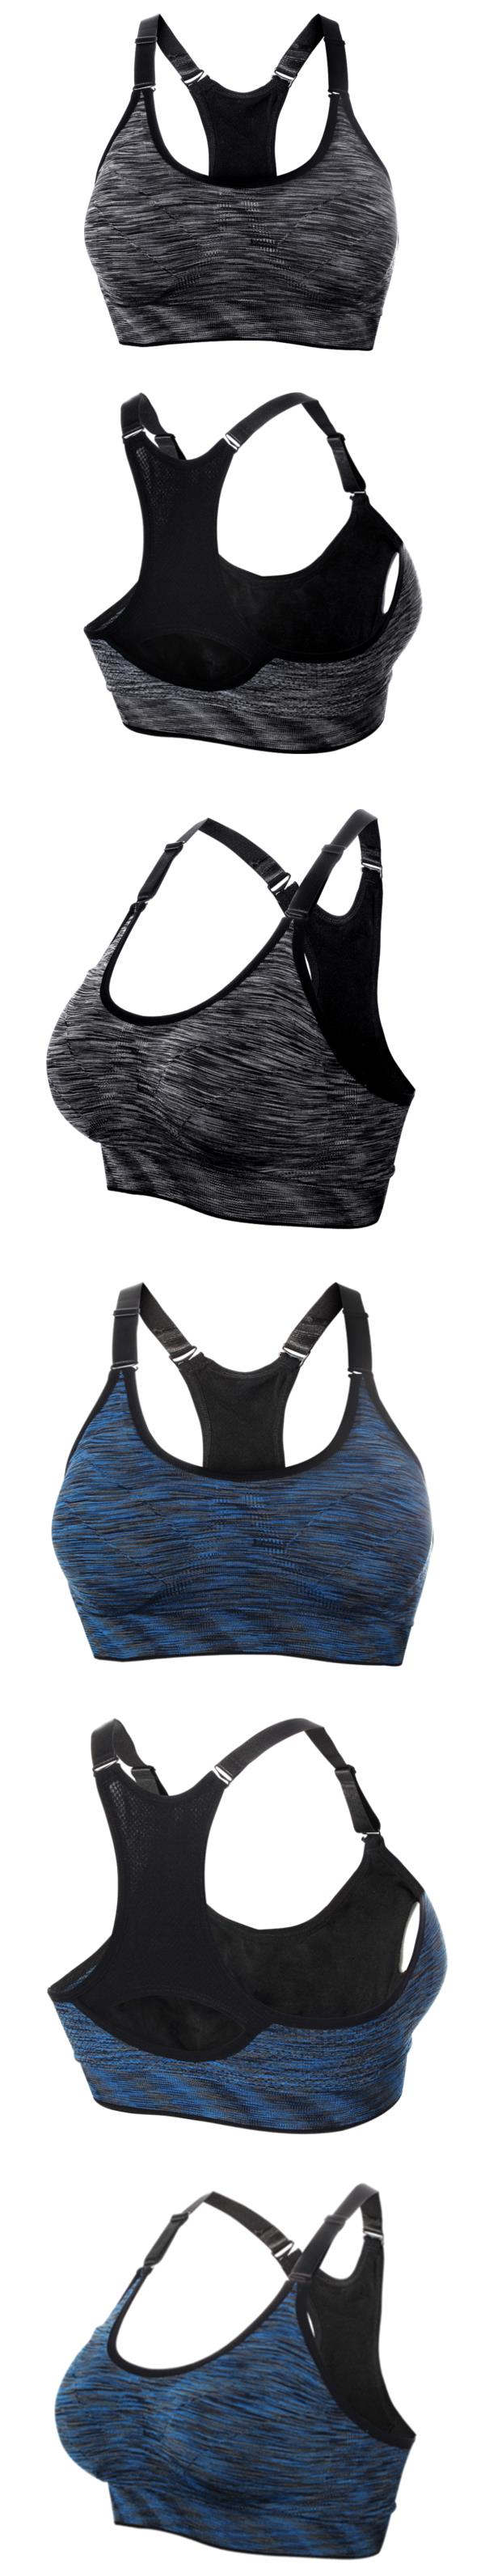 Women-Space-Dyeing-Wireless-Bra-Shakeproof-Stretch-Push-Up-Bras-Top-Seamless-Padded-Vest-1070058